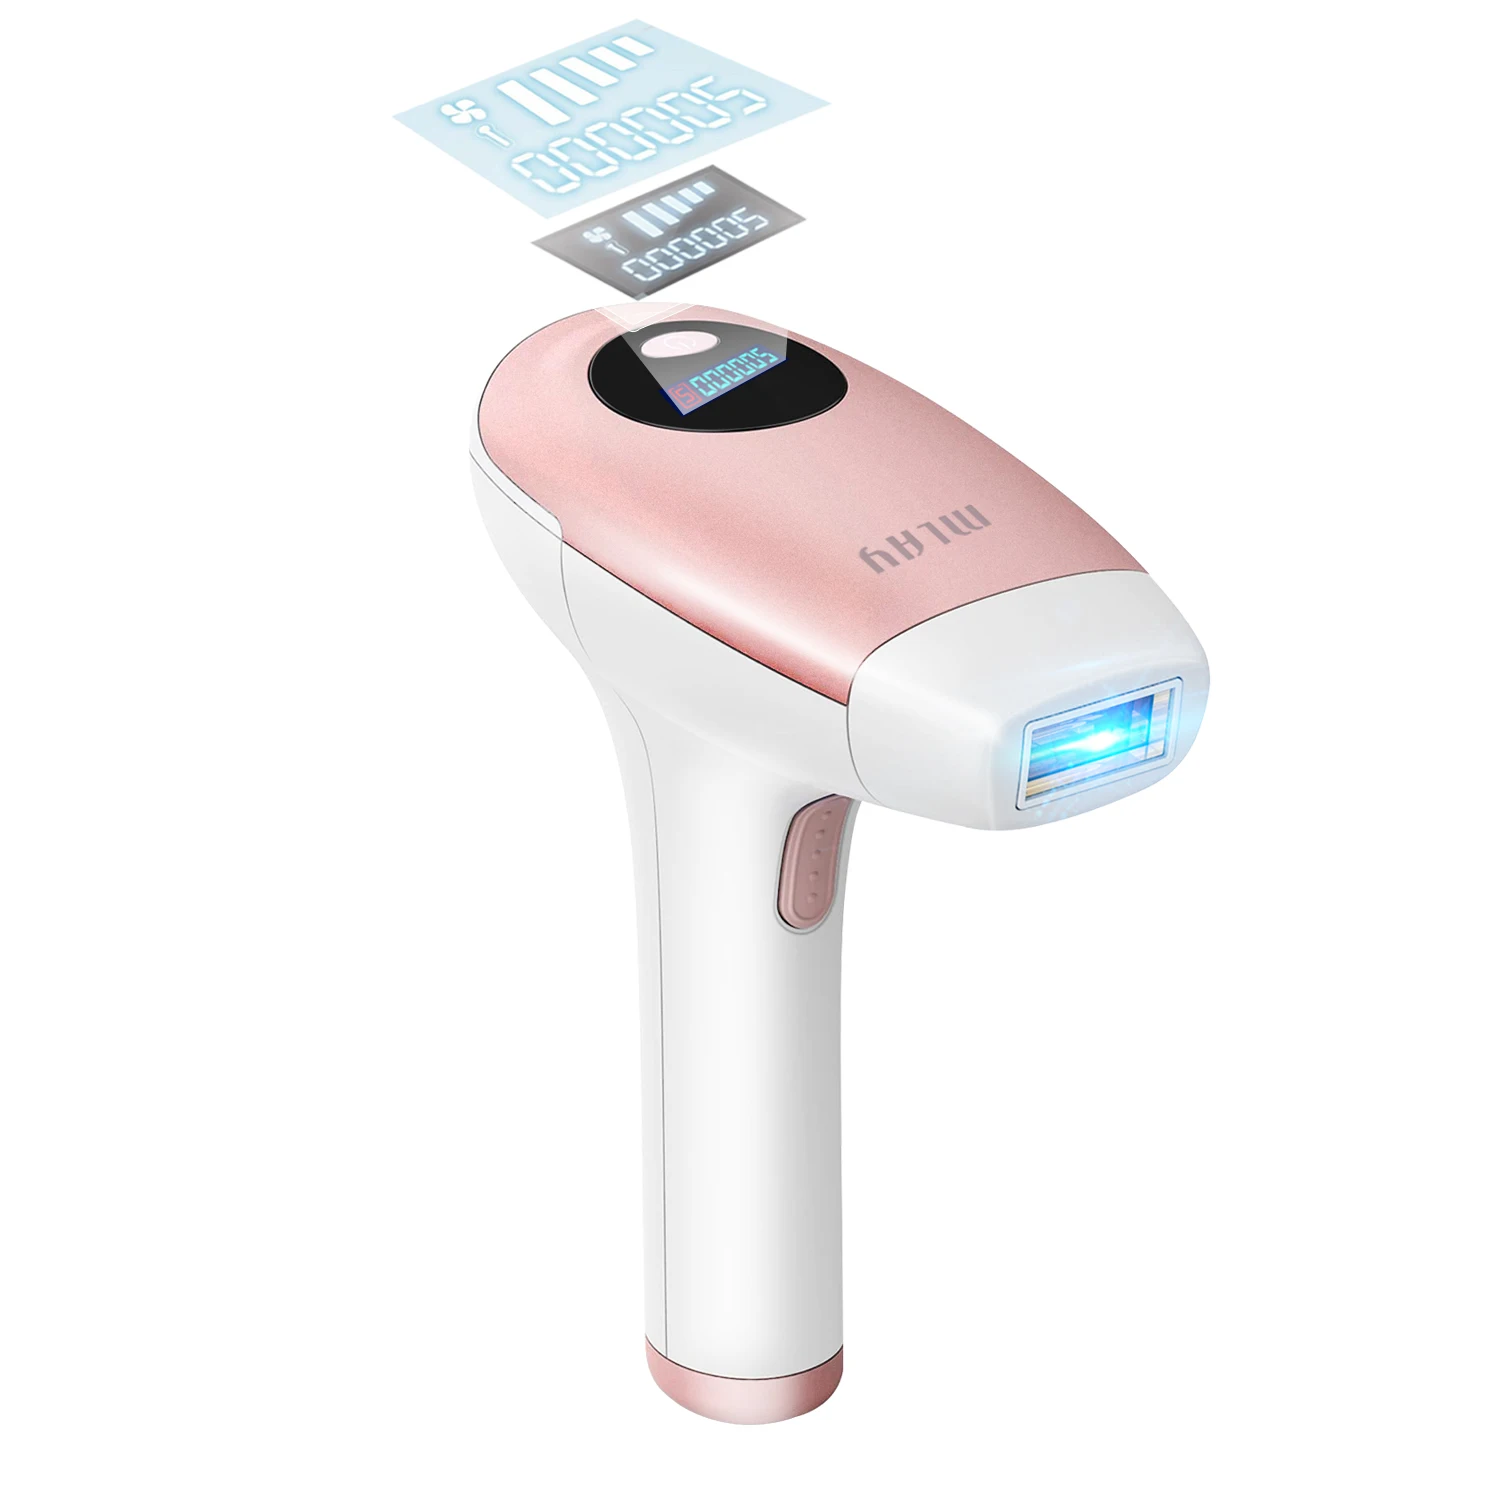 

Mlay IPL Epilator Hair Removal Electric Depilador Machine for Whole Body Permanent Painless Hair Remove a Laser 500000 Flashes